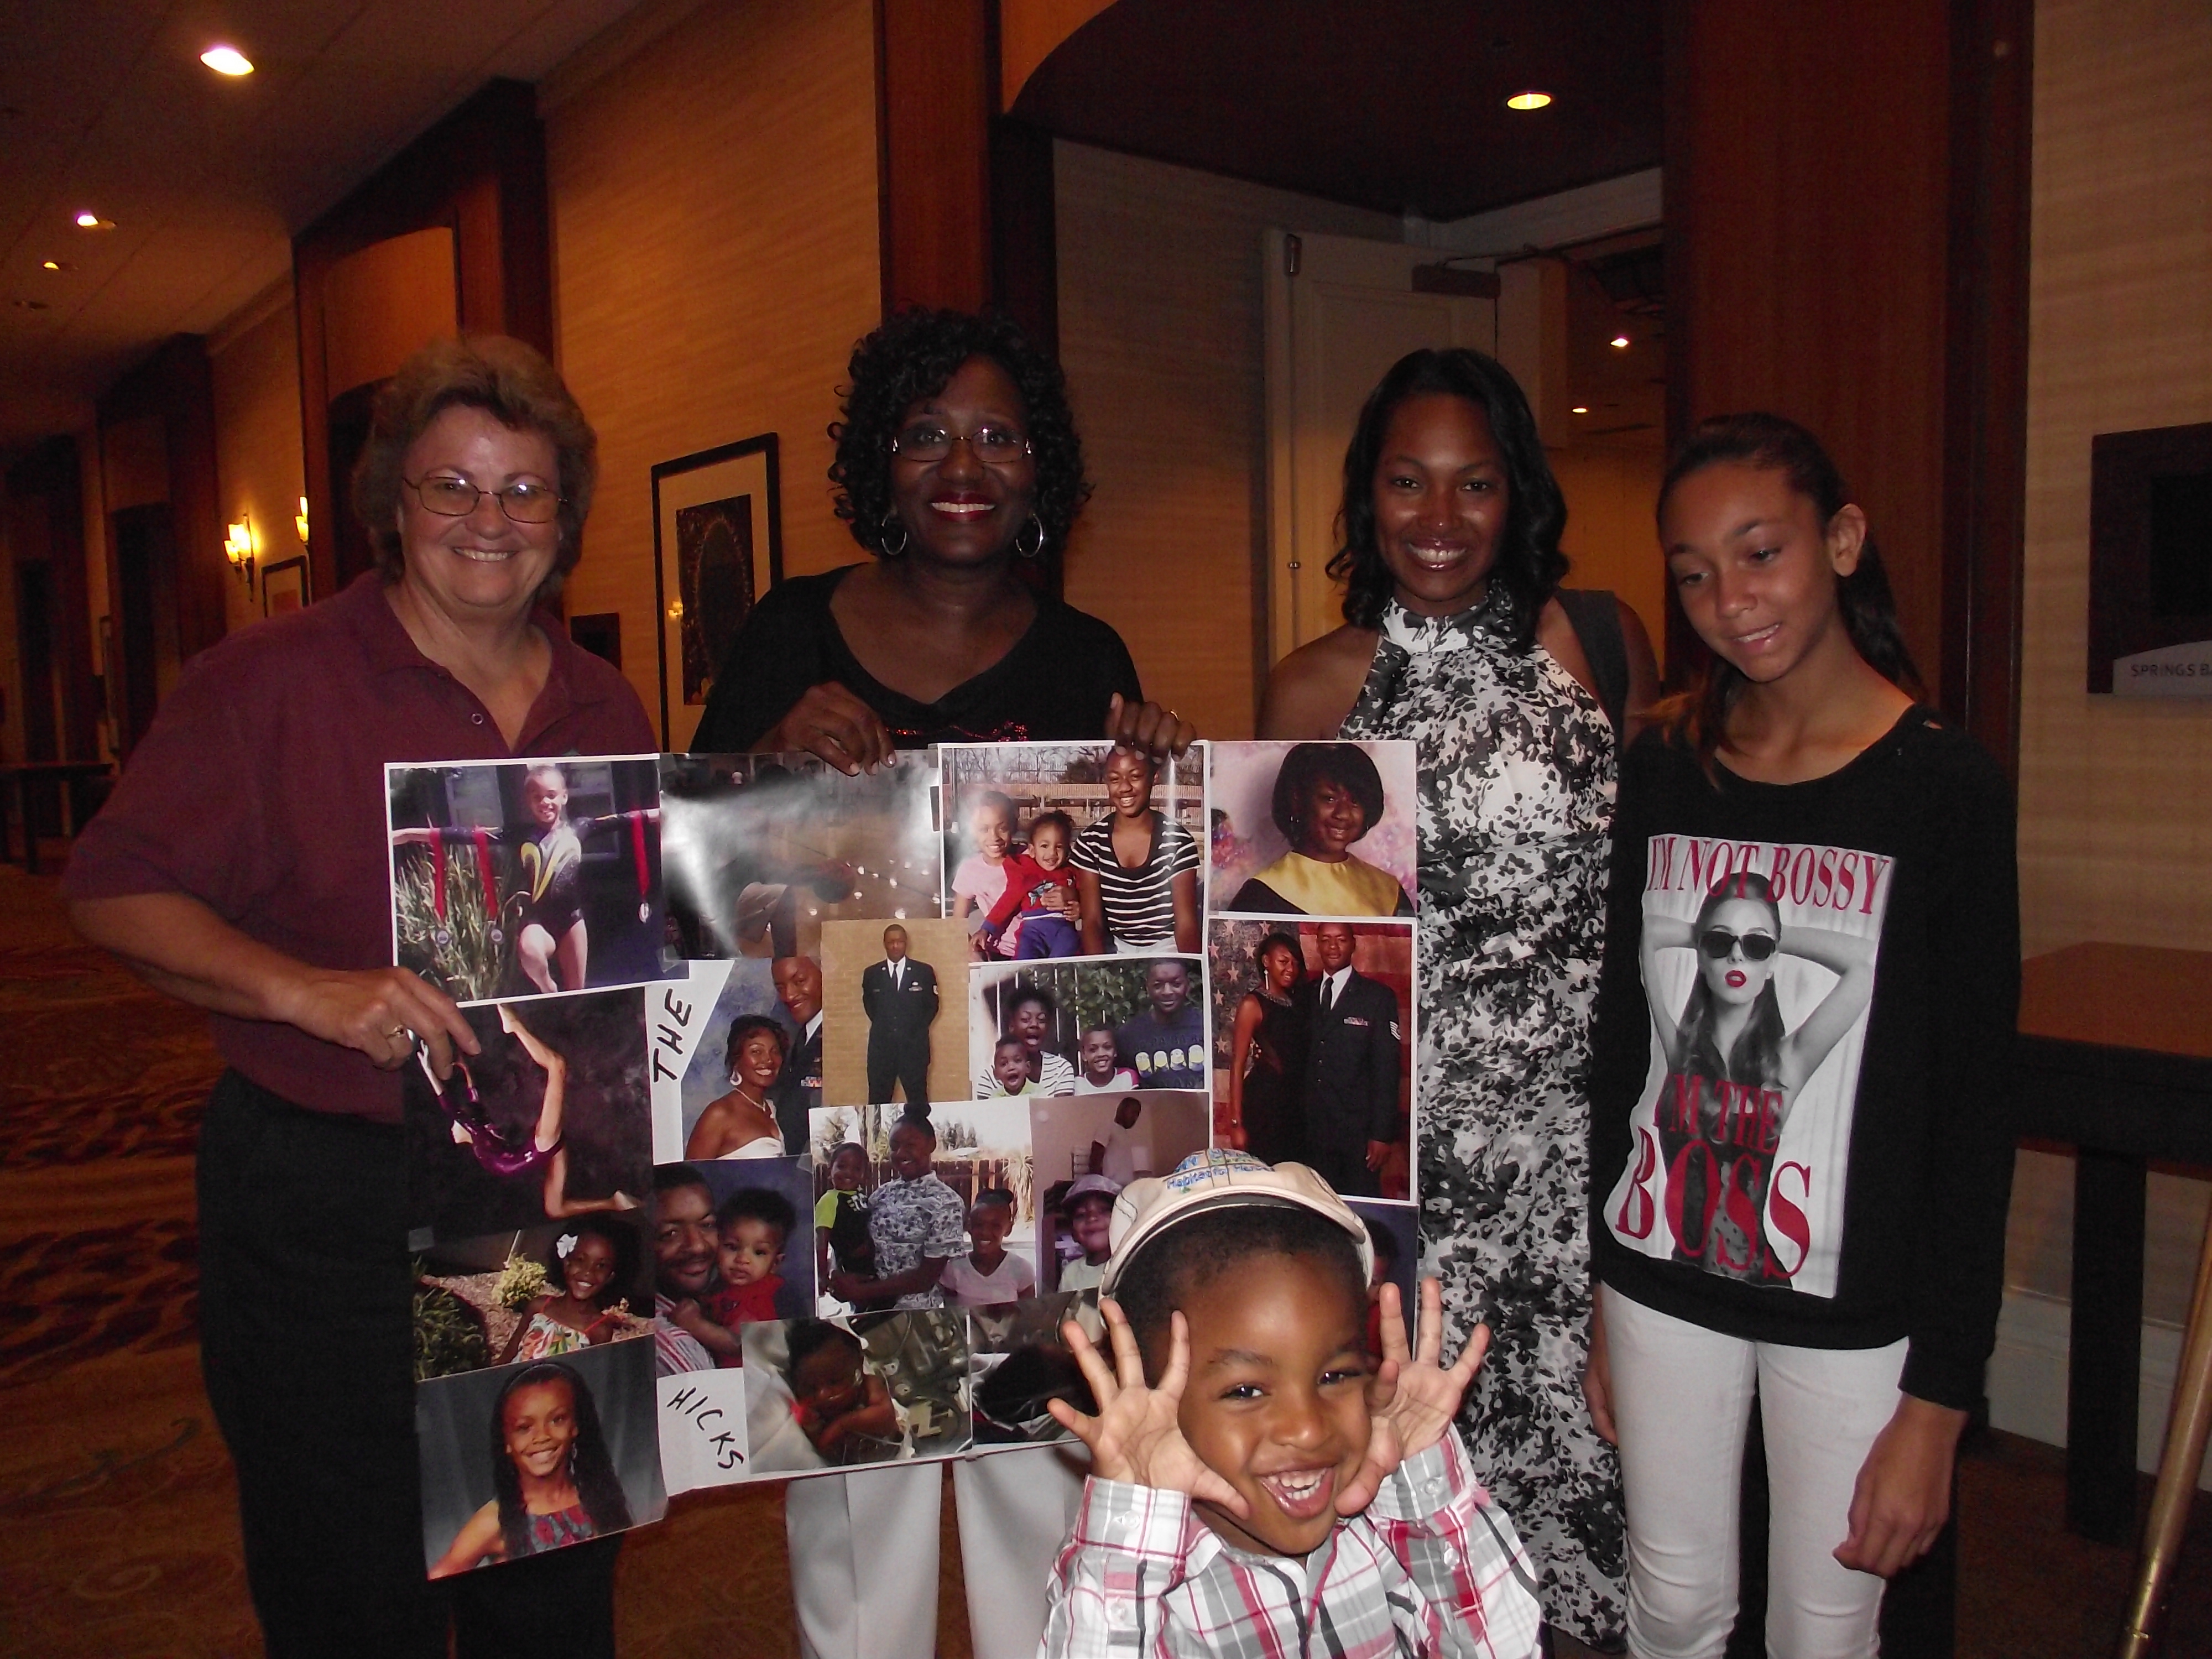 Hicks family with Jack and Jill of America, Inc.